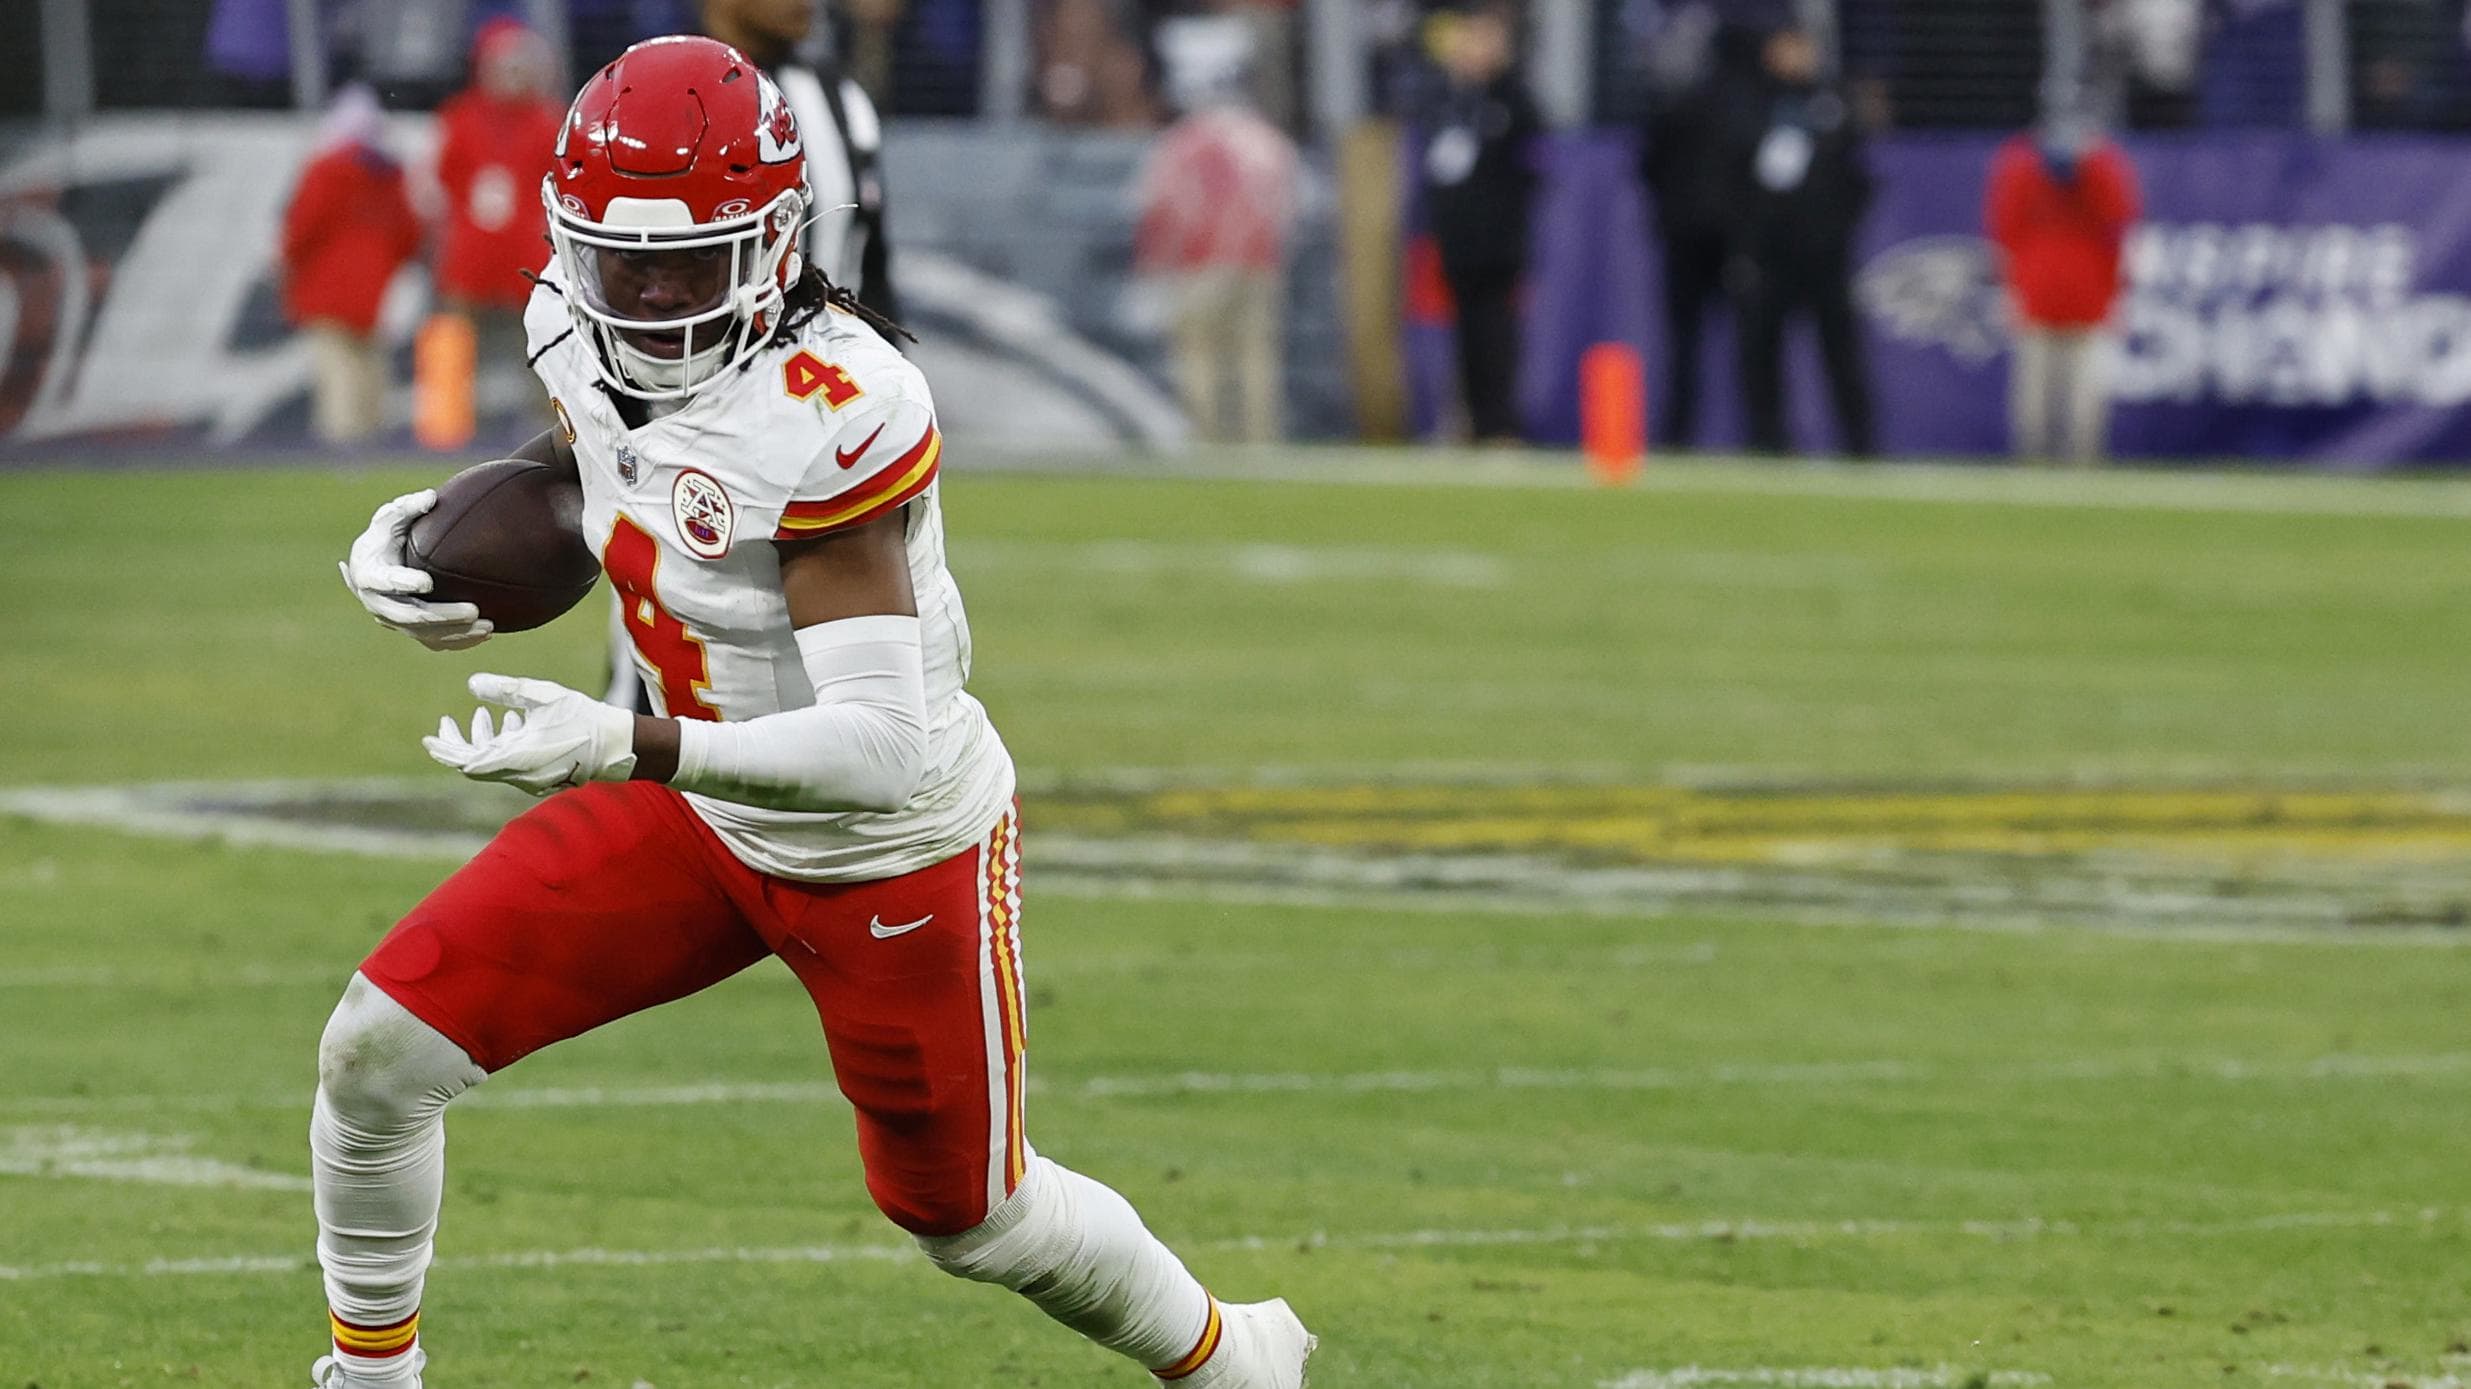 NFL News: Kansas City Chiefs Rethinking Rashee Rice Pick After Shocking Legal Issues